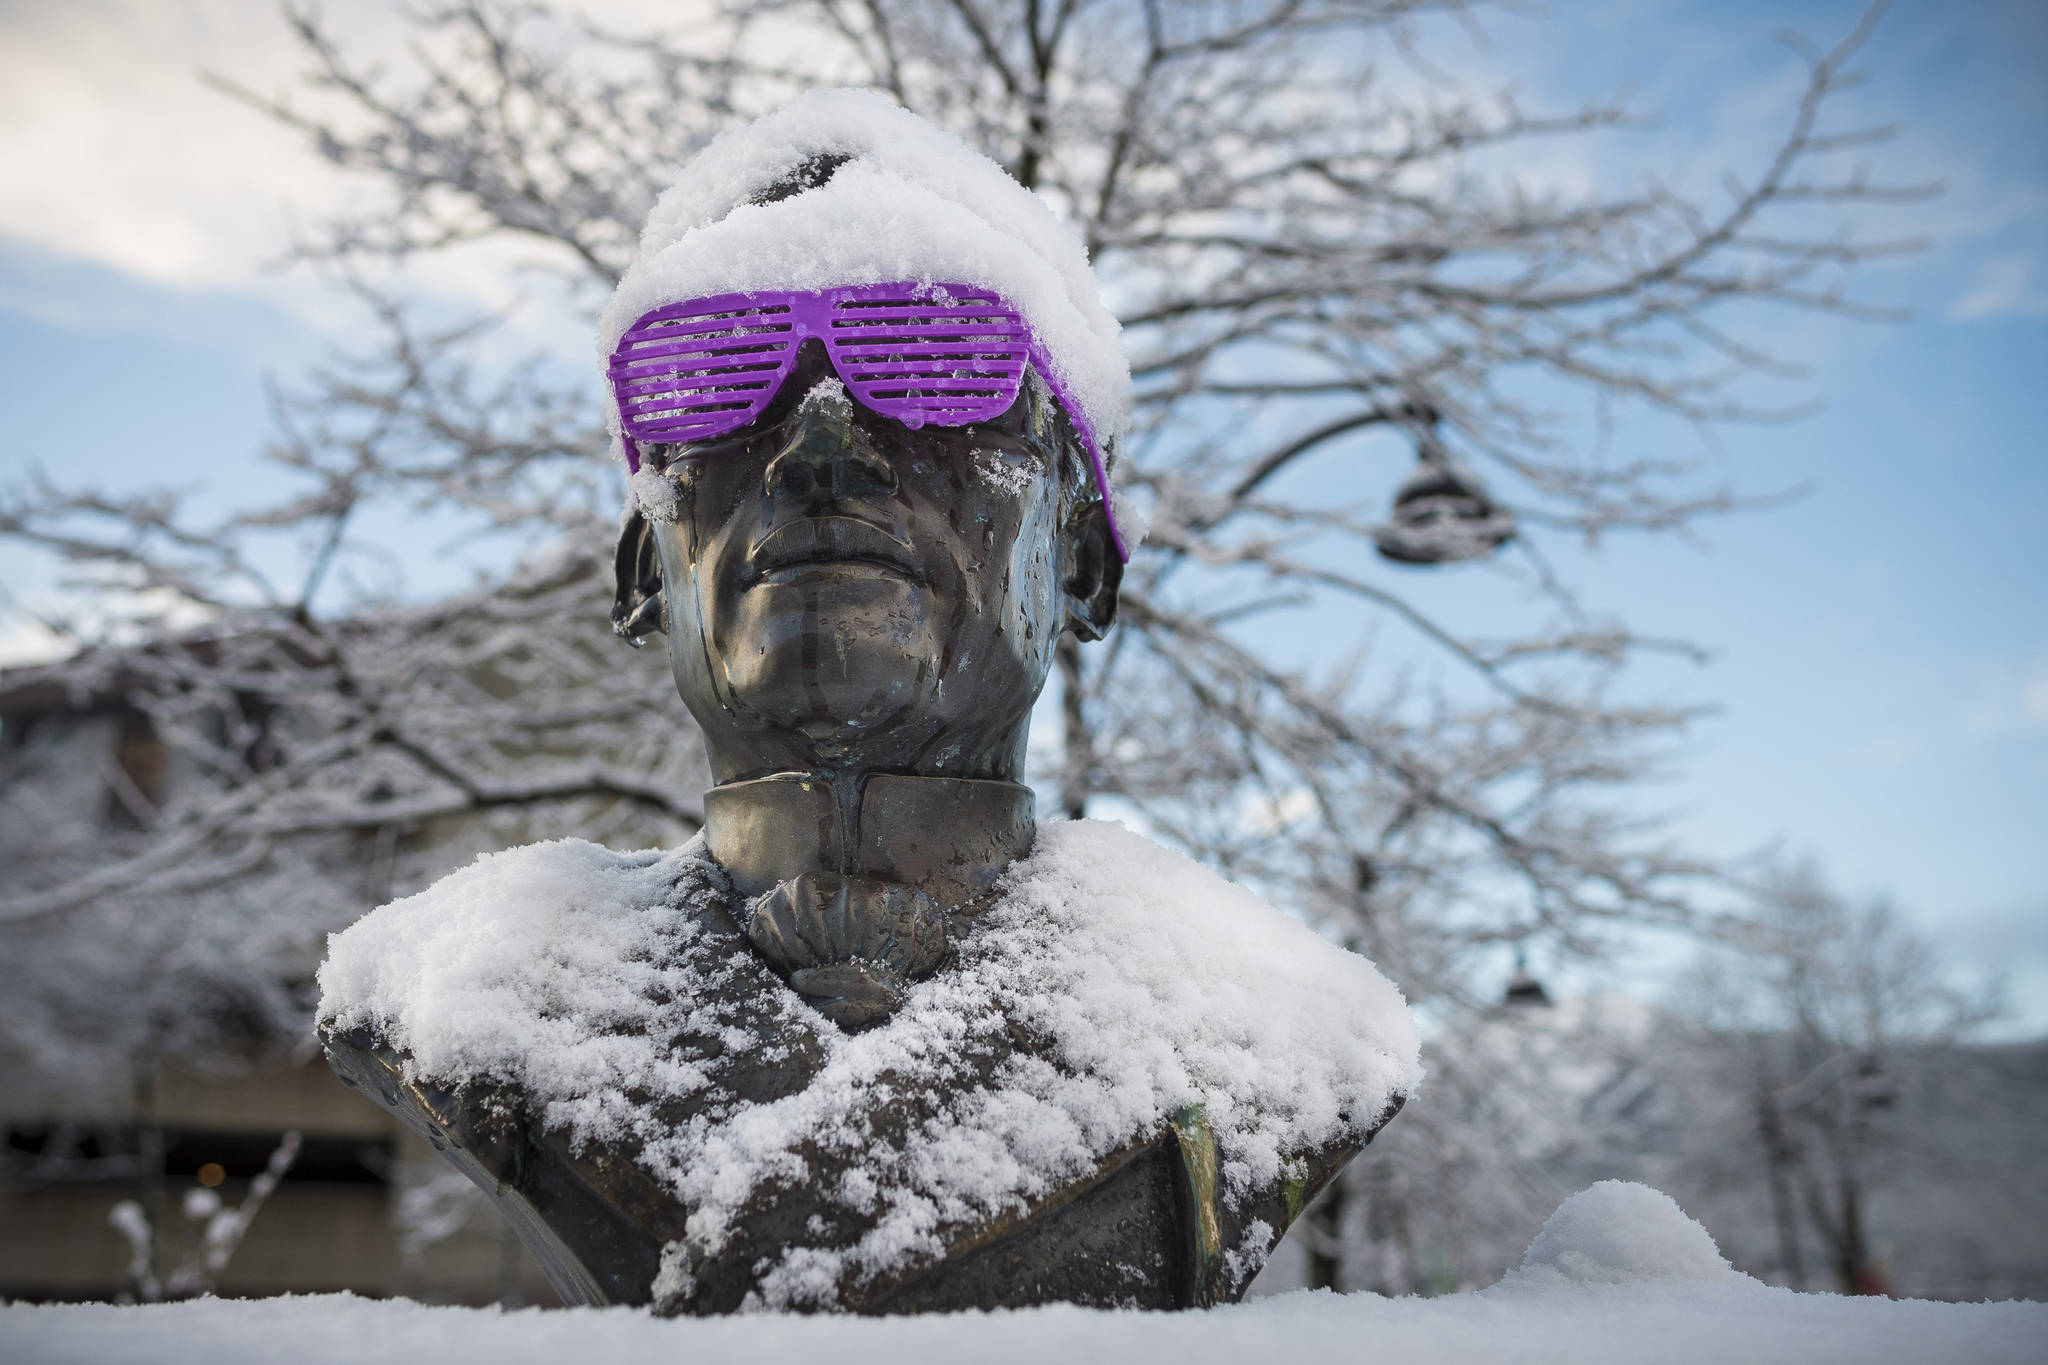 The Bust of Dr. Jose P. Rizal at Manila Square sports shutter shades and a fresh coat of snow in downtown Juneau on Thursday, Dec. 20, 2018. (Michael Penn | Juneau Empire)